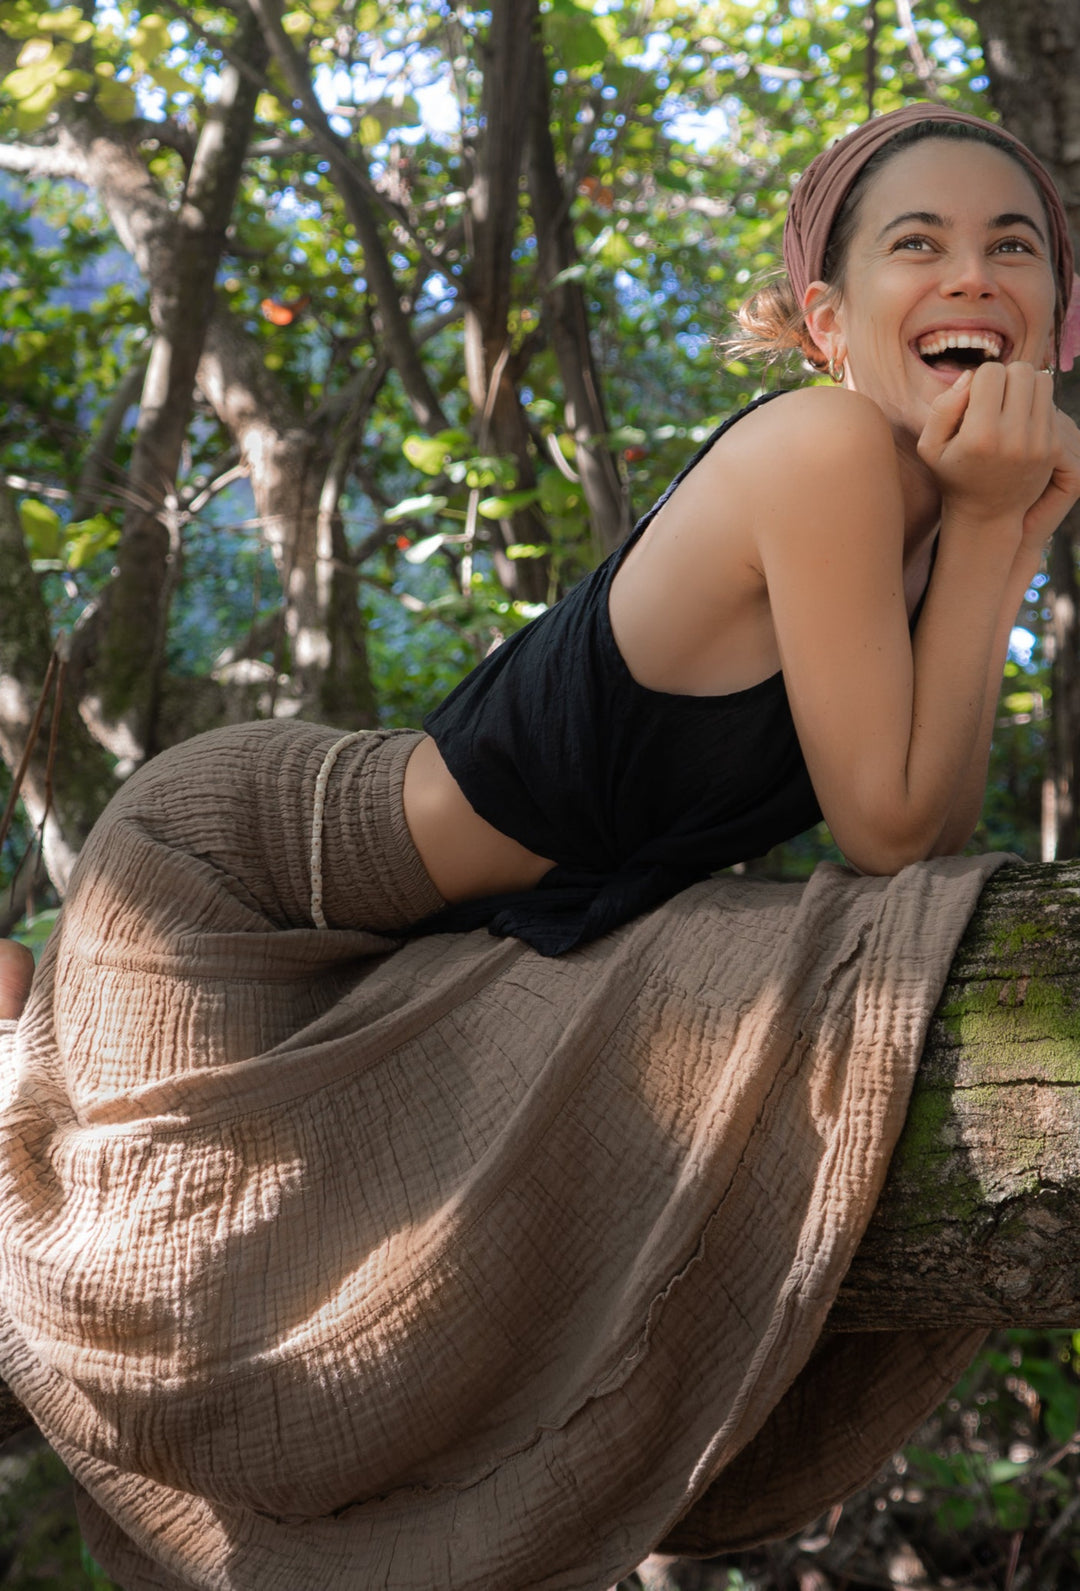 Woman laughs while resting across tree limb wearing long brown gauze skirt.